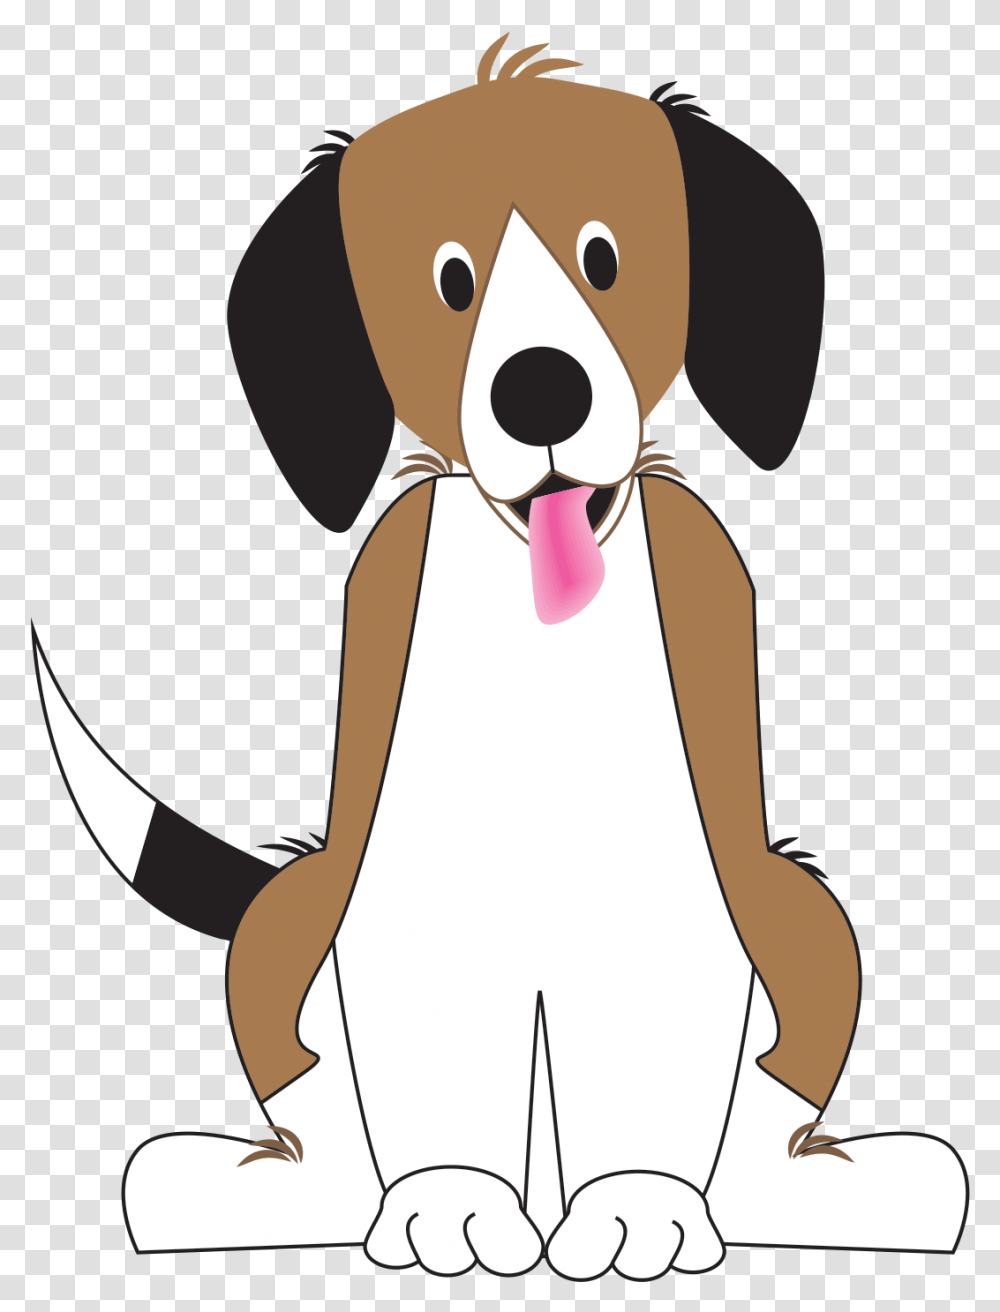 Cats Dogs Wordart Papers All And Background Beagle Clip Art, Hound, Pet, Canine, Animal Transparent Png